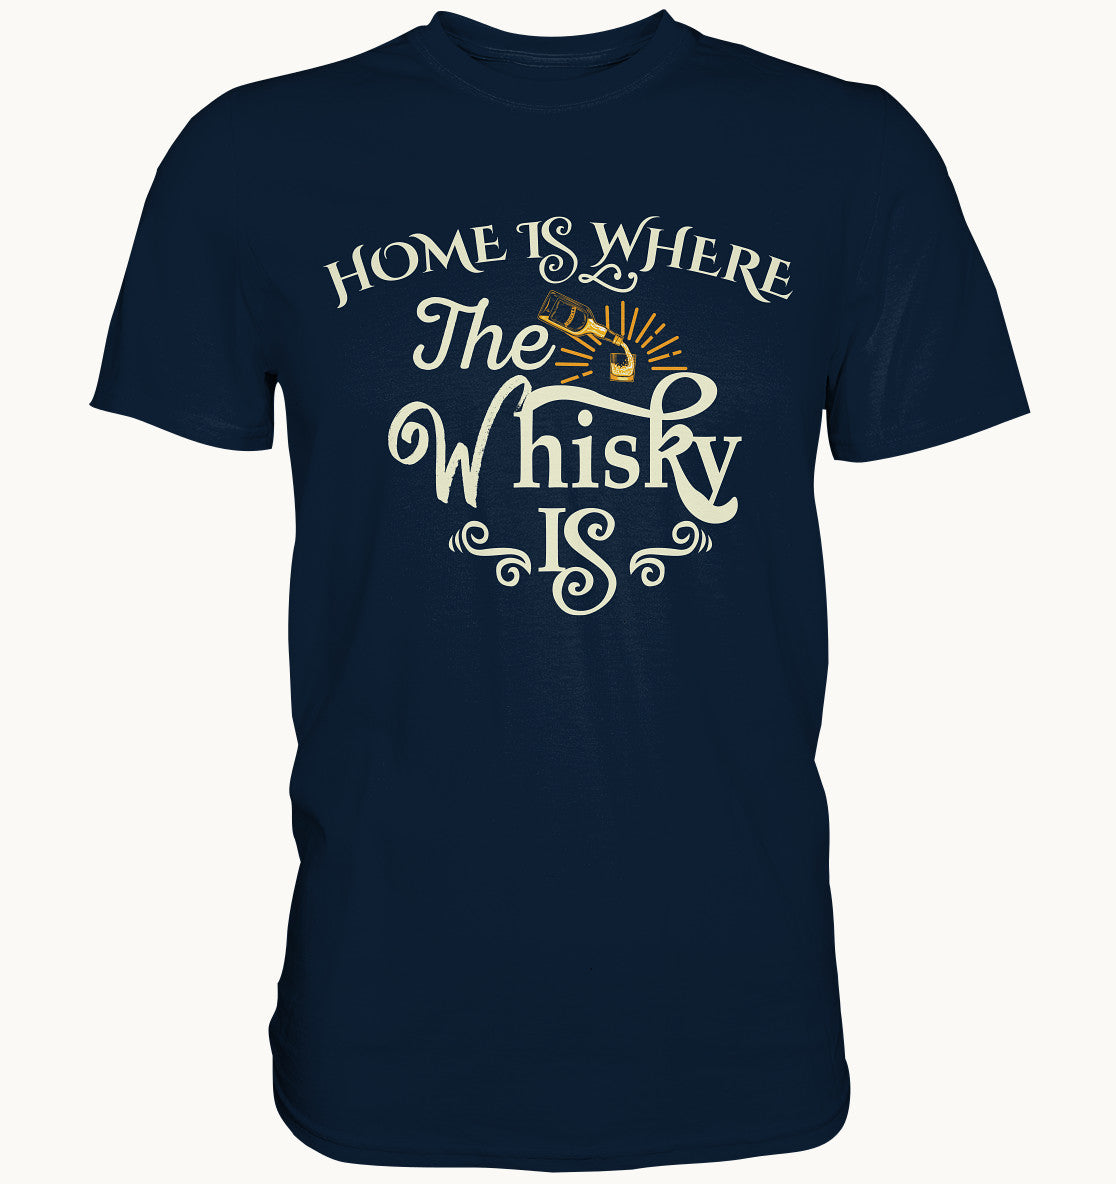 Home is where the Whisky is - Premium Shirt